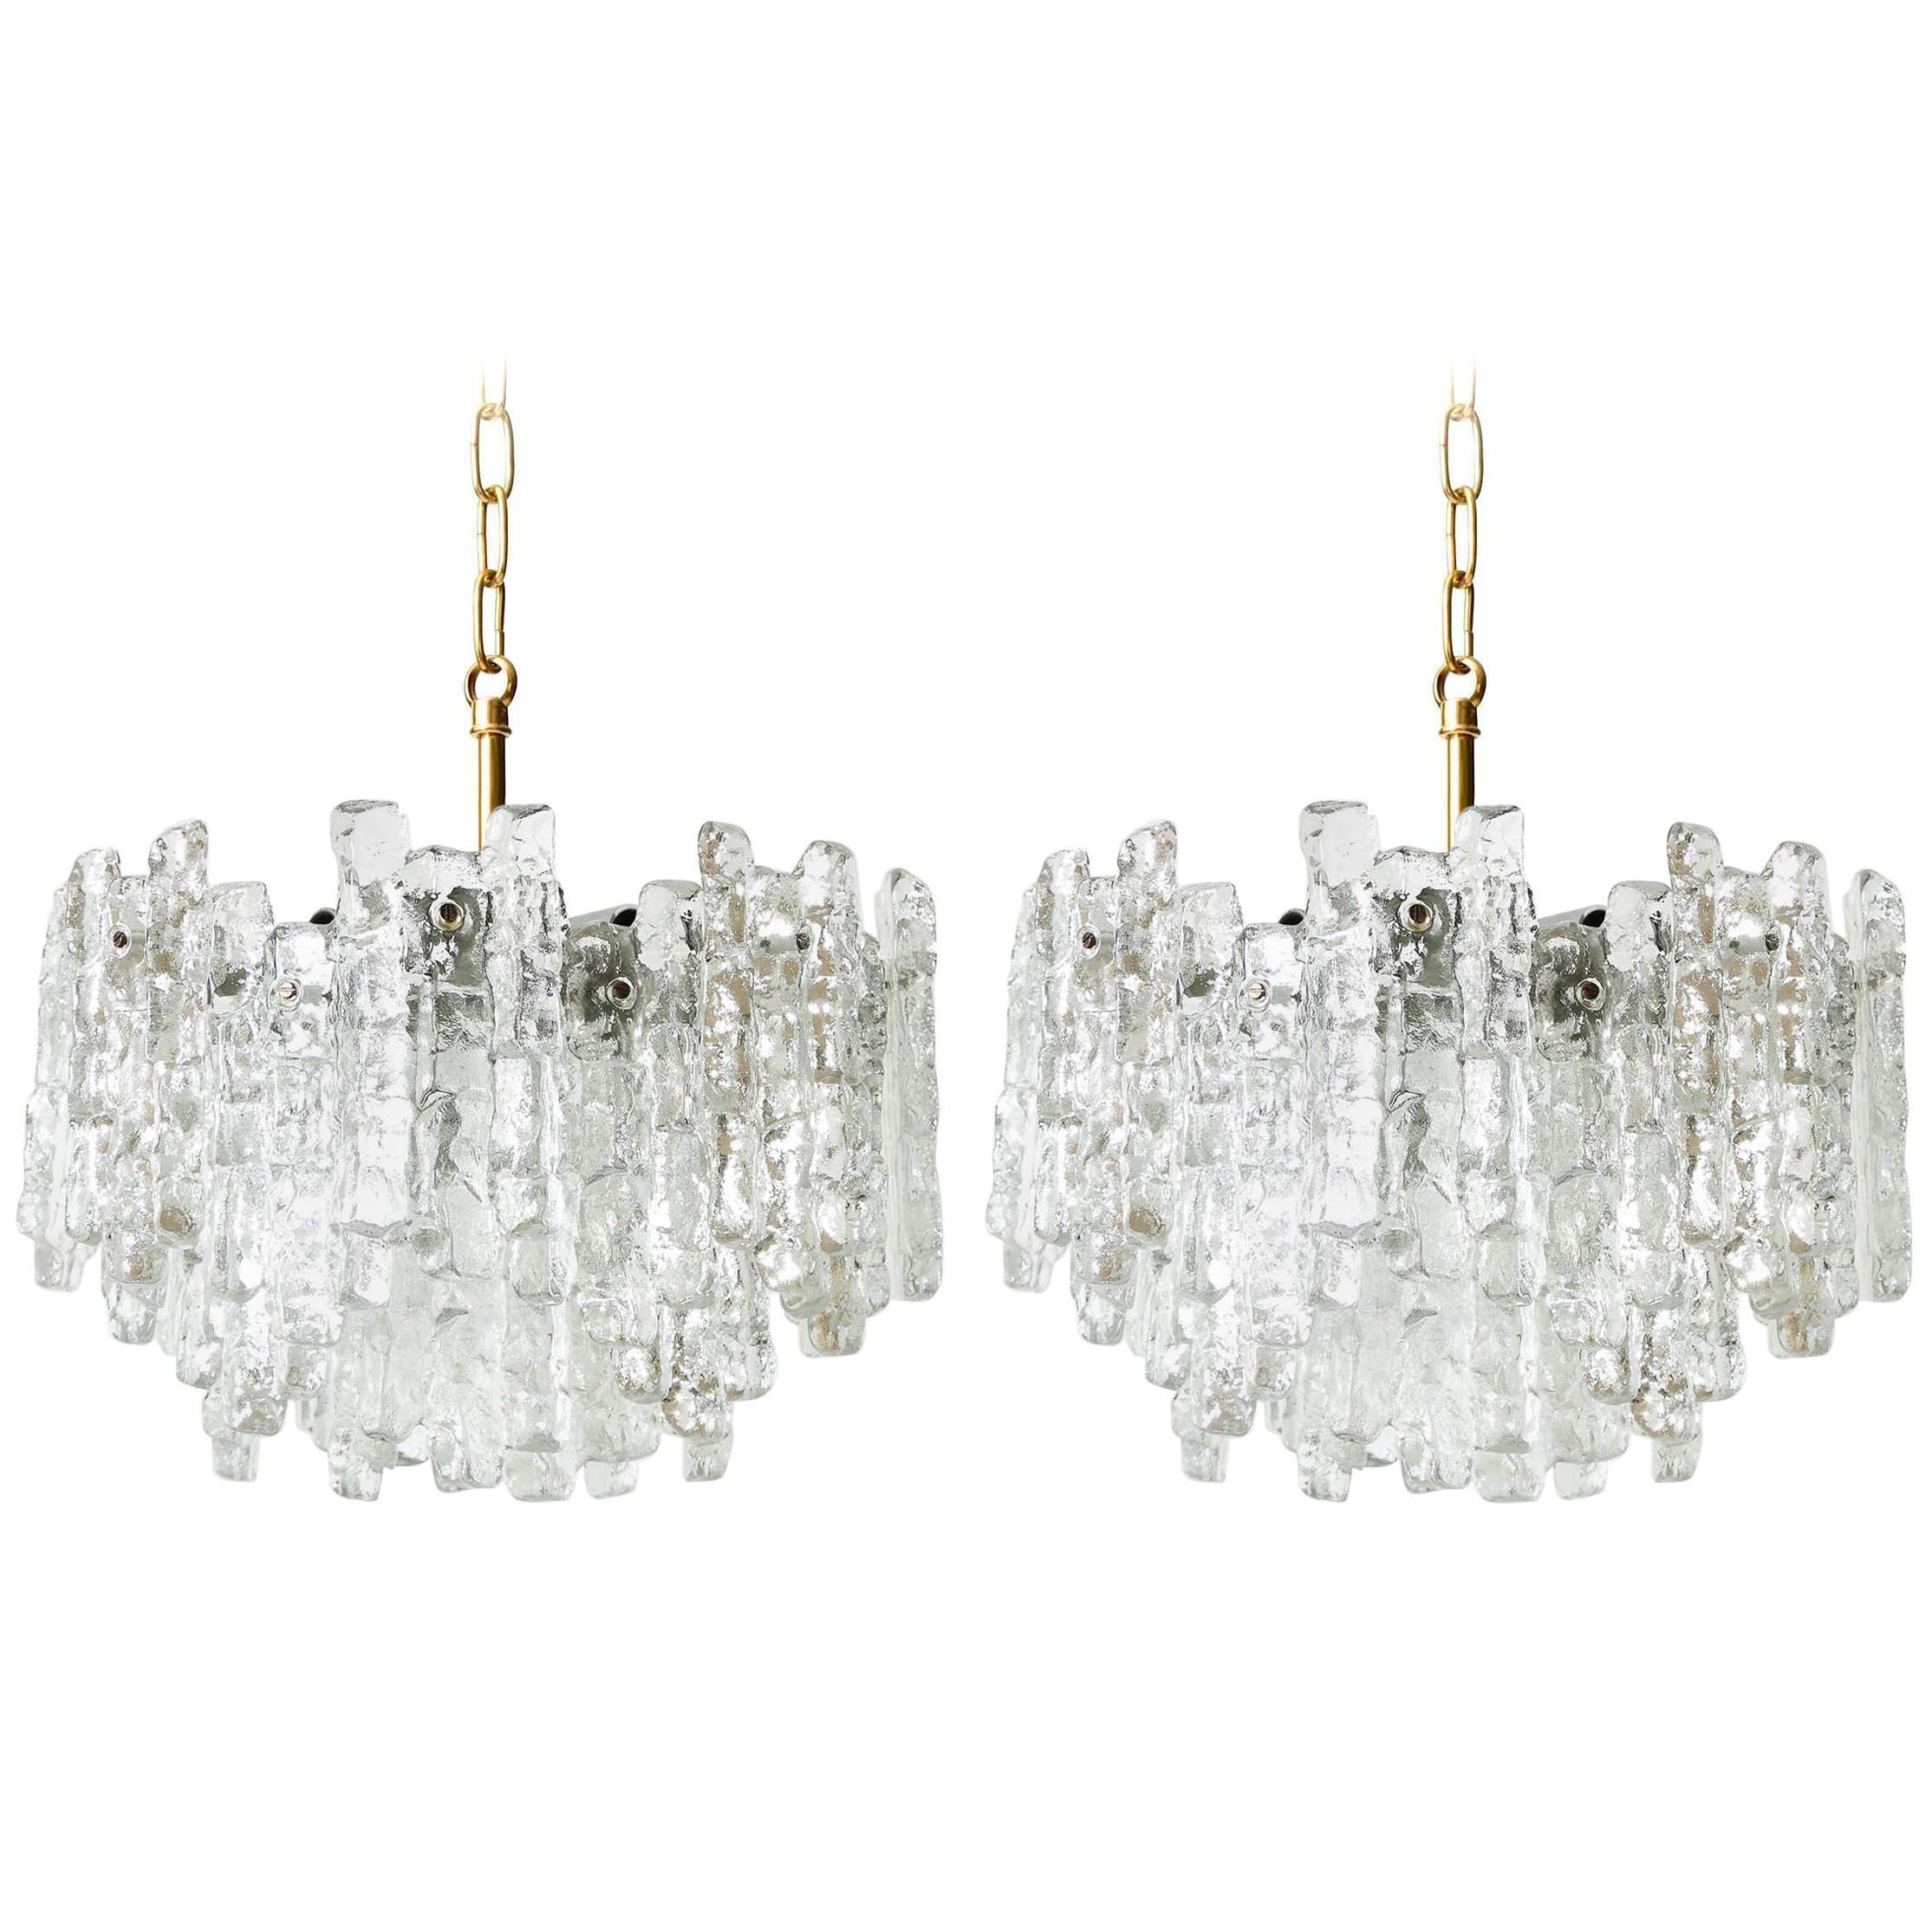 A pair of beautiful ice glass light fixtures by Kalmar, Austria, manufactured in midcentury, circa 1970 (late 1960s or early 1970s). Each chandelier is made of 28 massive ice blocks which are mounted on a silver painted metal frame.
Each fixture